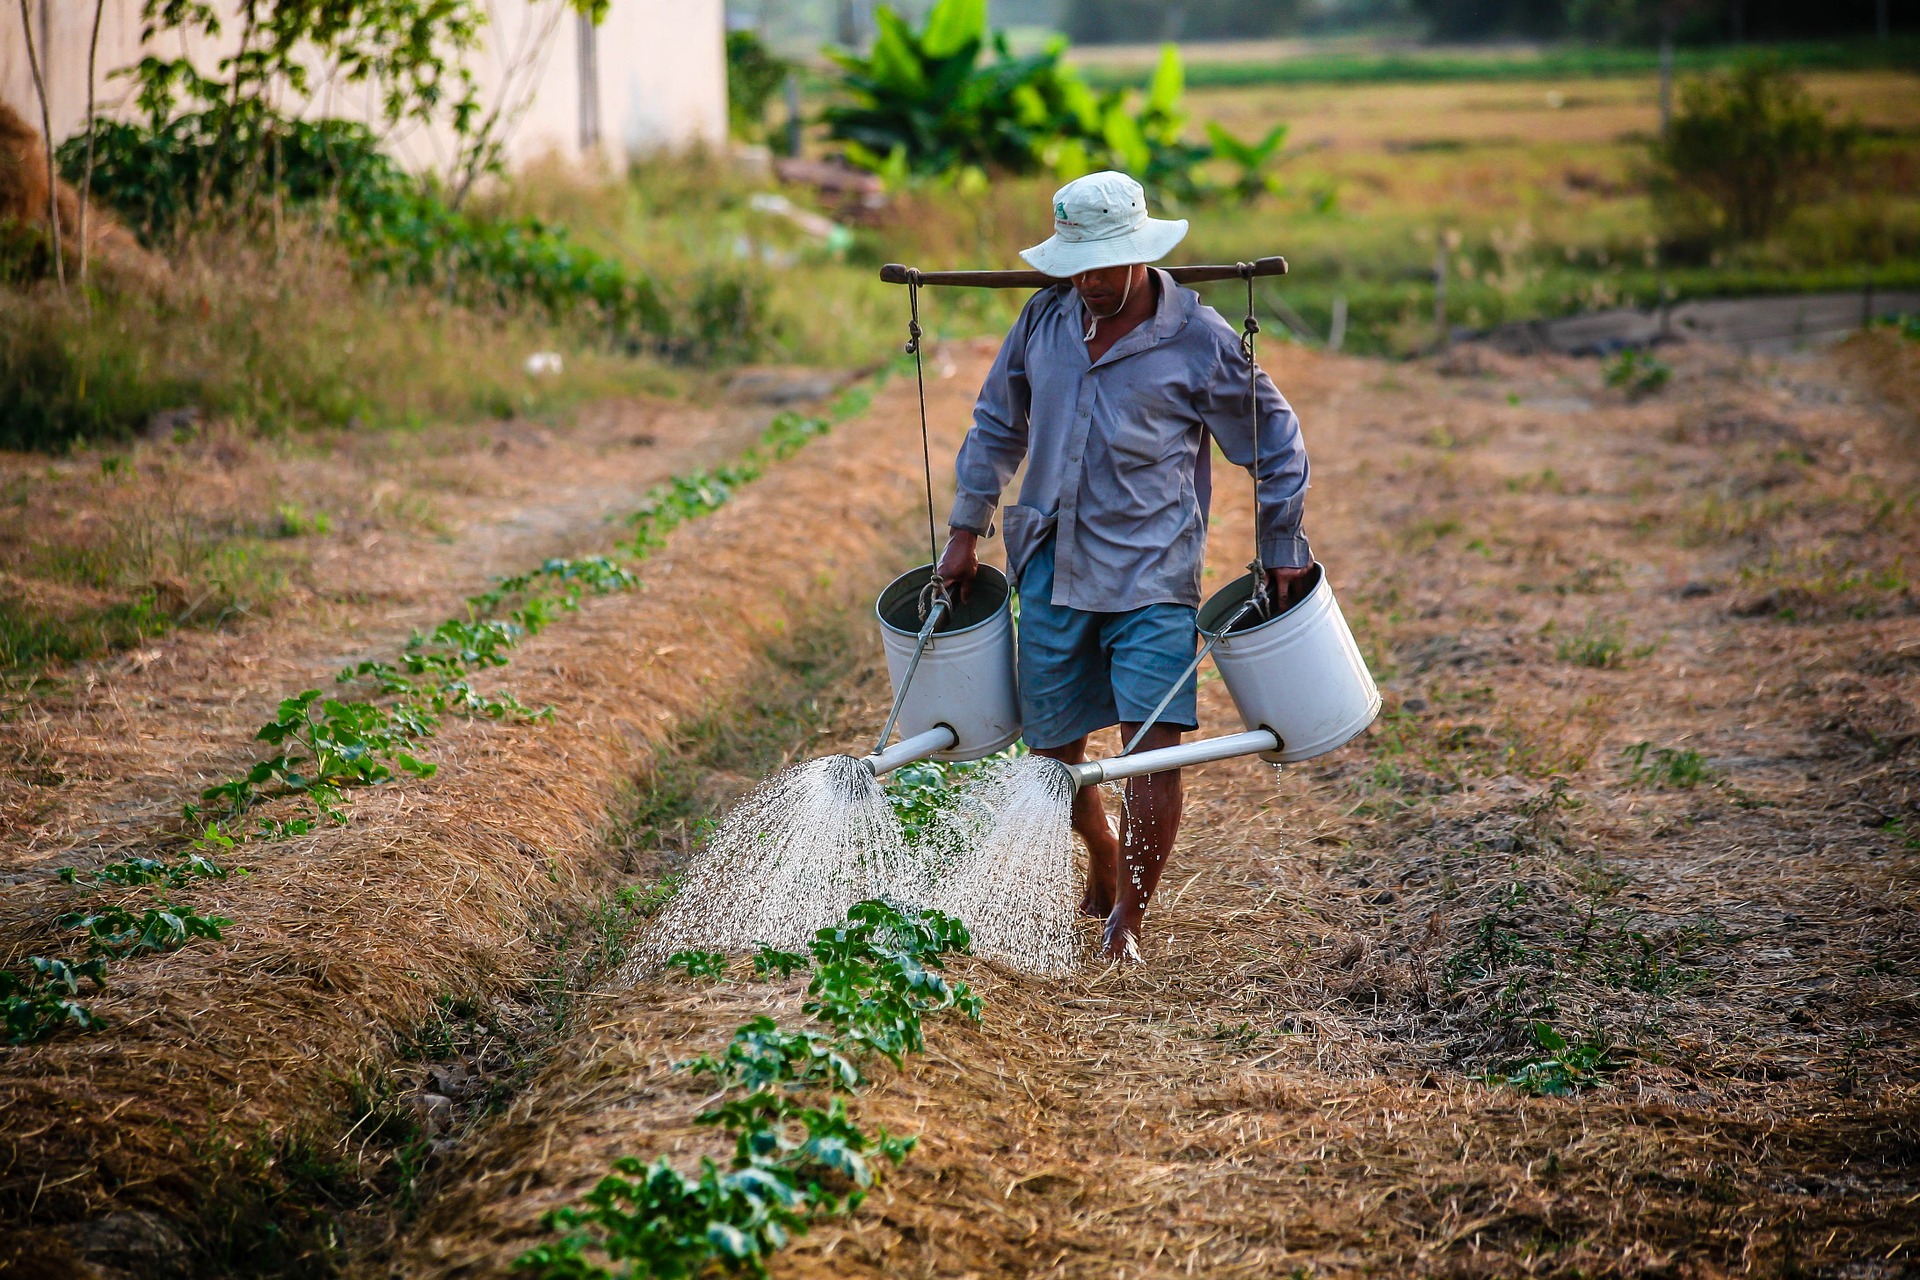 Man with watering can. Source: Pixabay